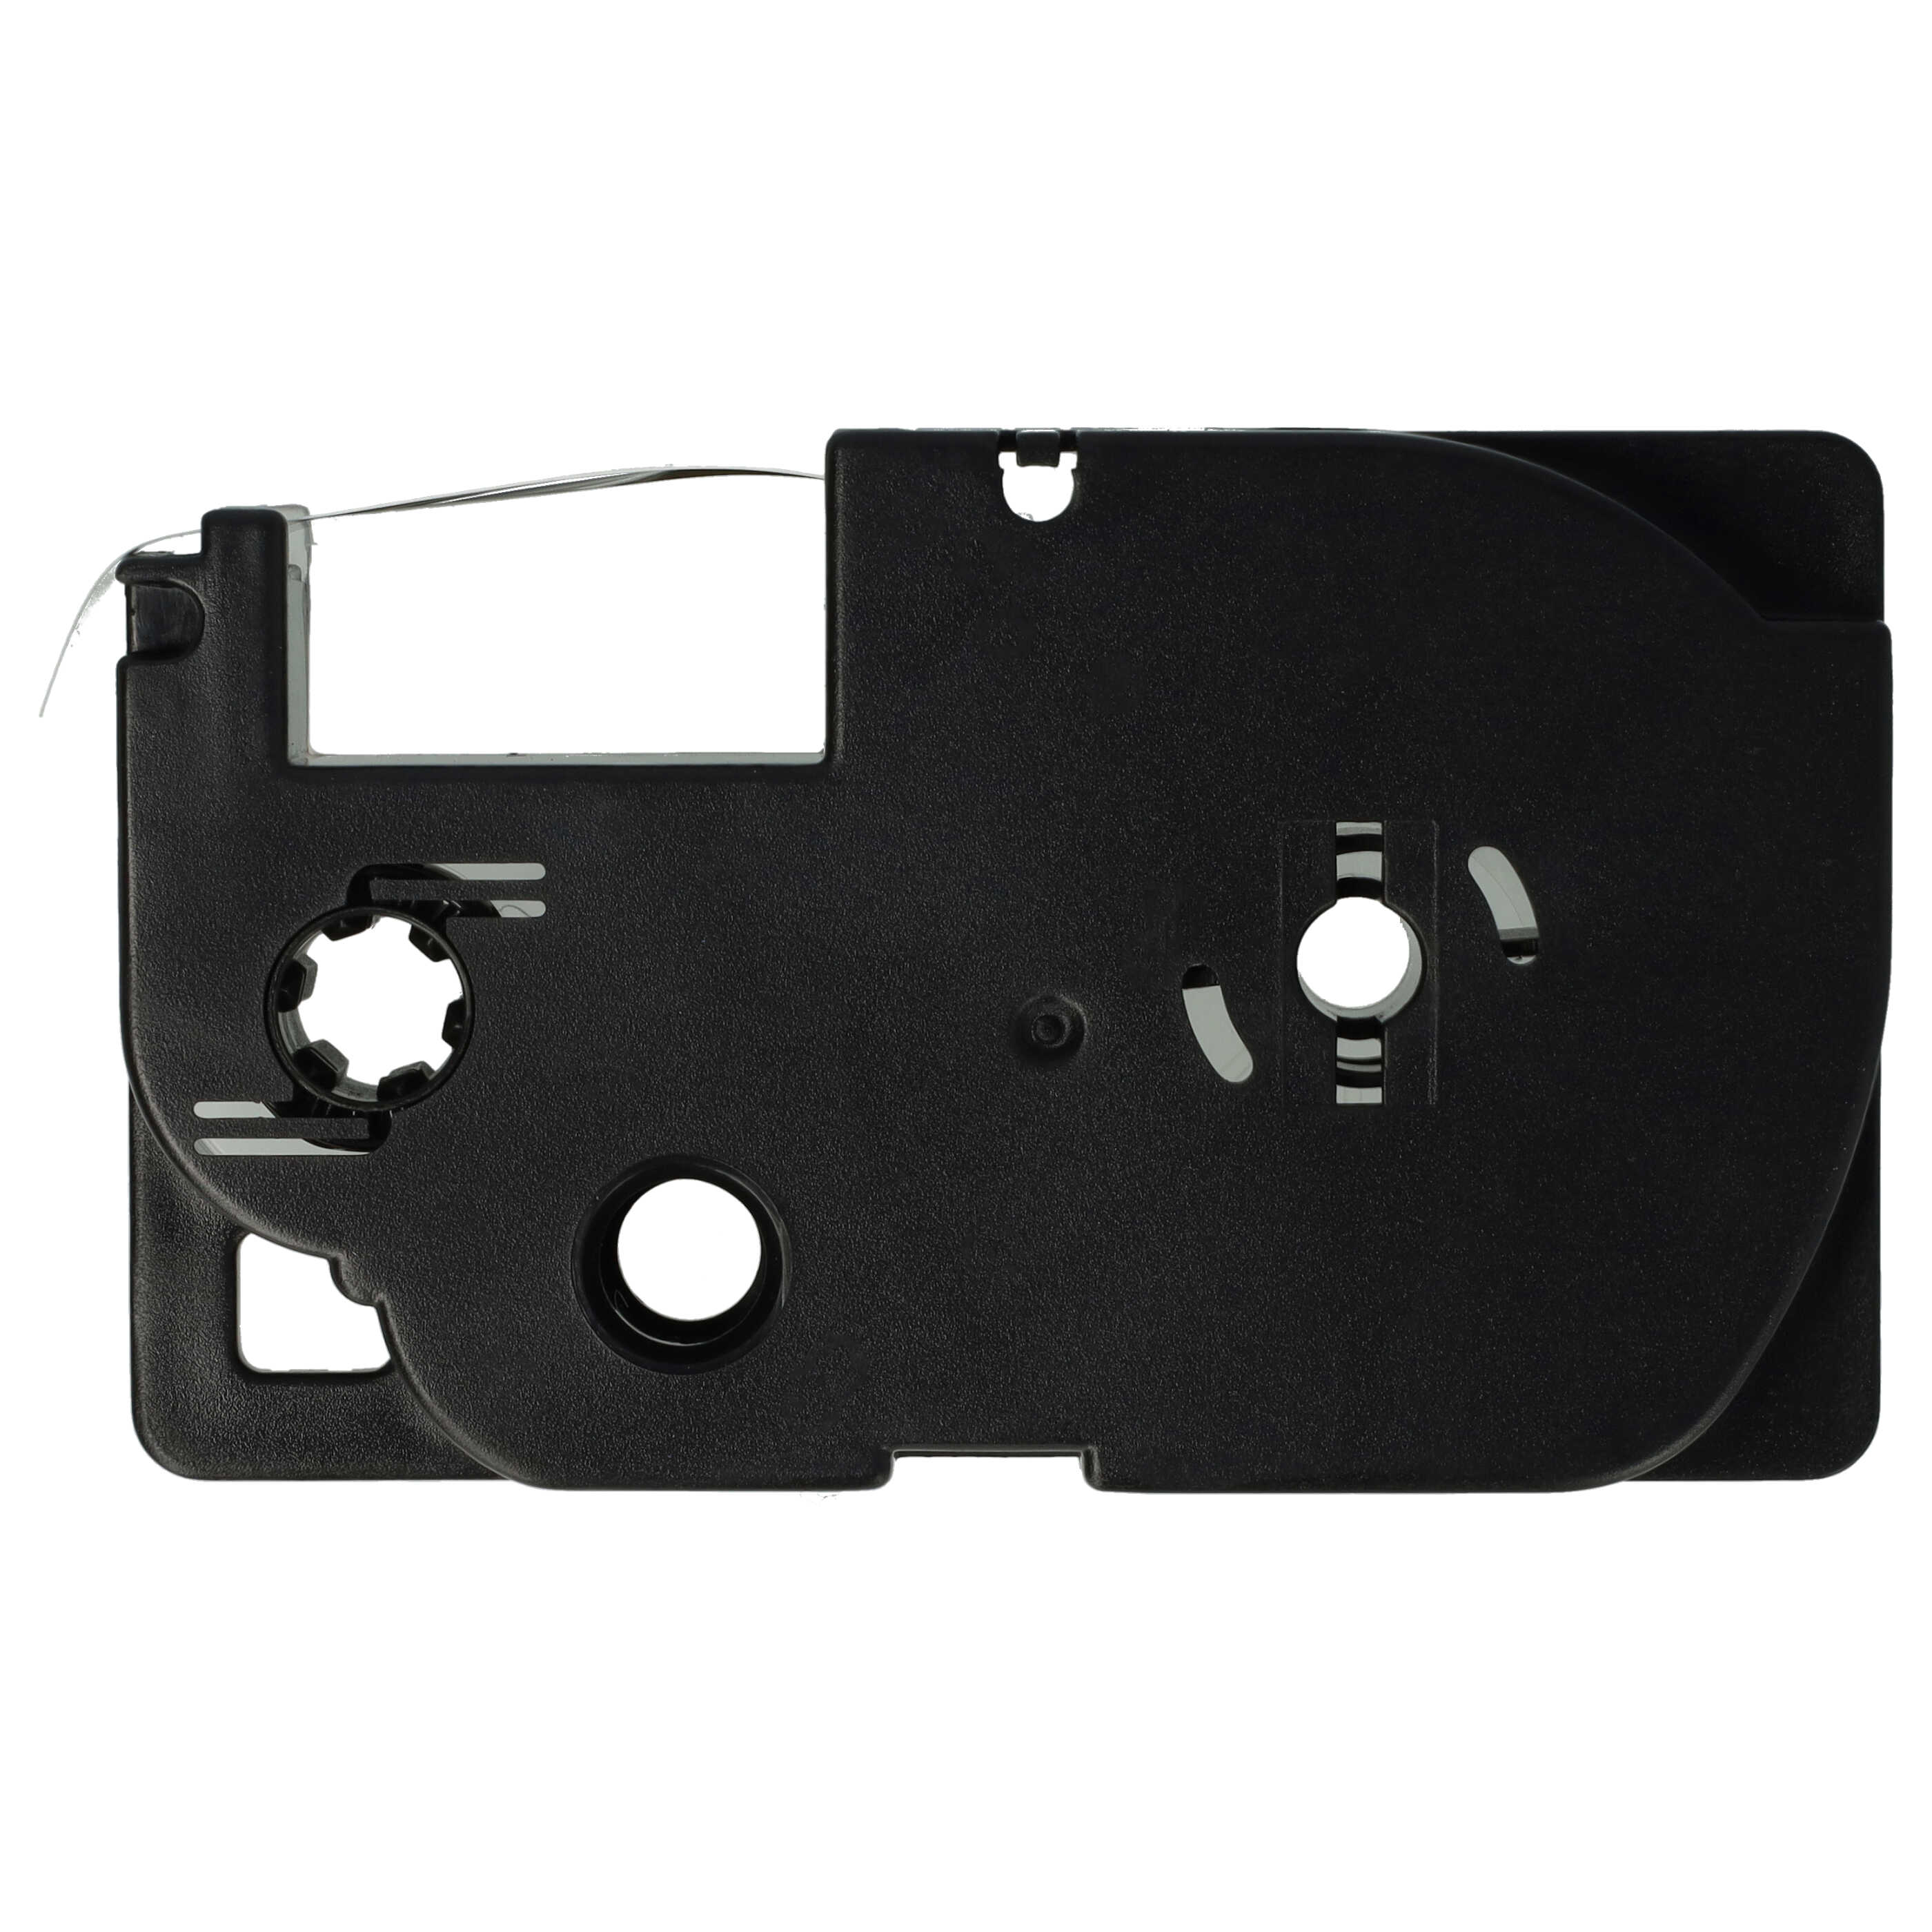 2x Label Tape as Replacement for Casio XR-9WE1 - 9 mm Black to White